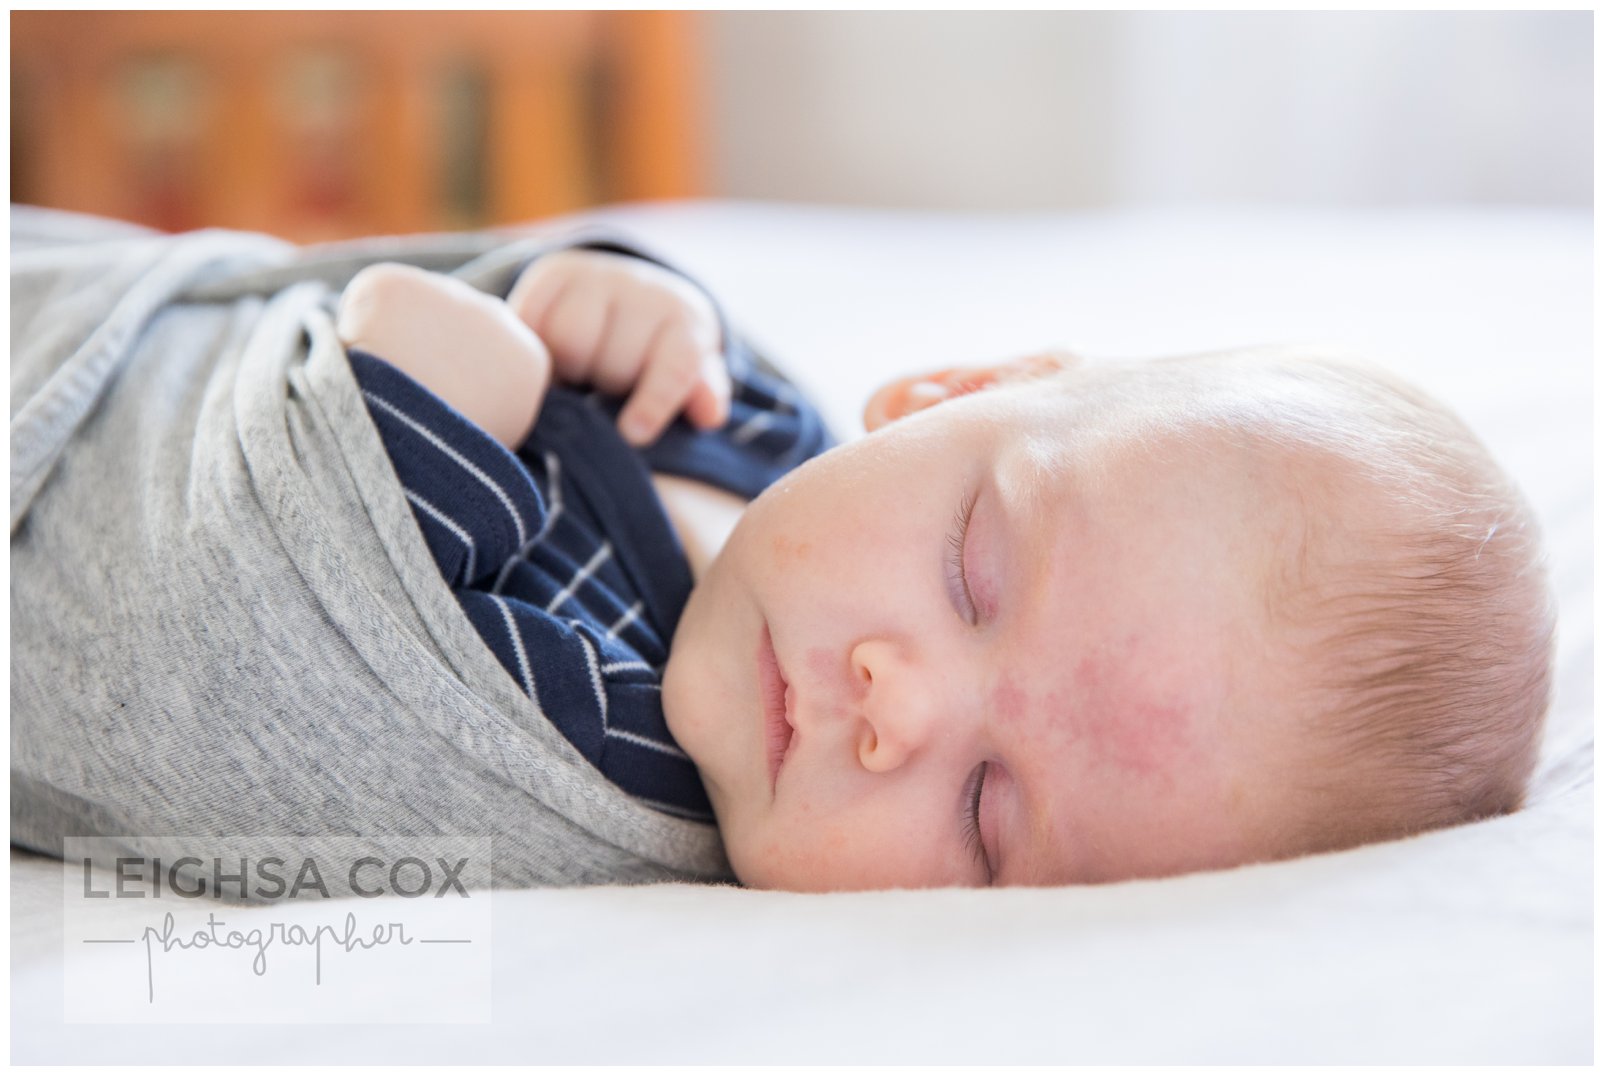 Portrait of newborn baby sleeping peacefully in swaddle surrounded by soft light fabric.